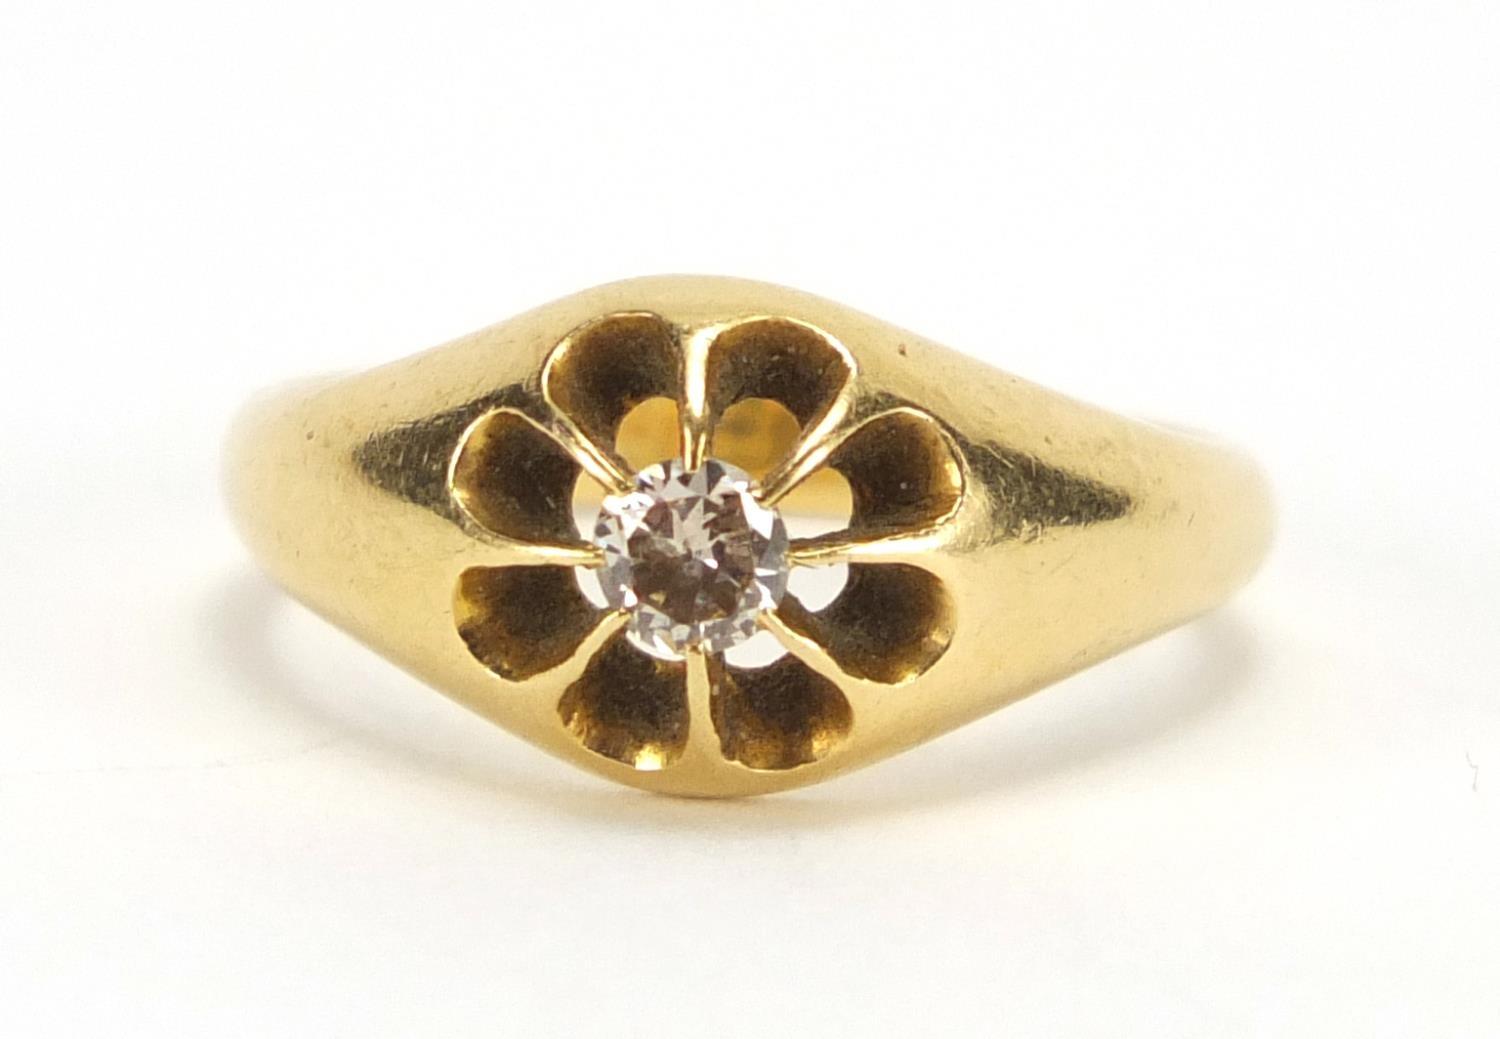 18ct gold diamond solitaire ring, size M, approximate weight 4.9g : For Extra Condition Reports - Image 2 of 5